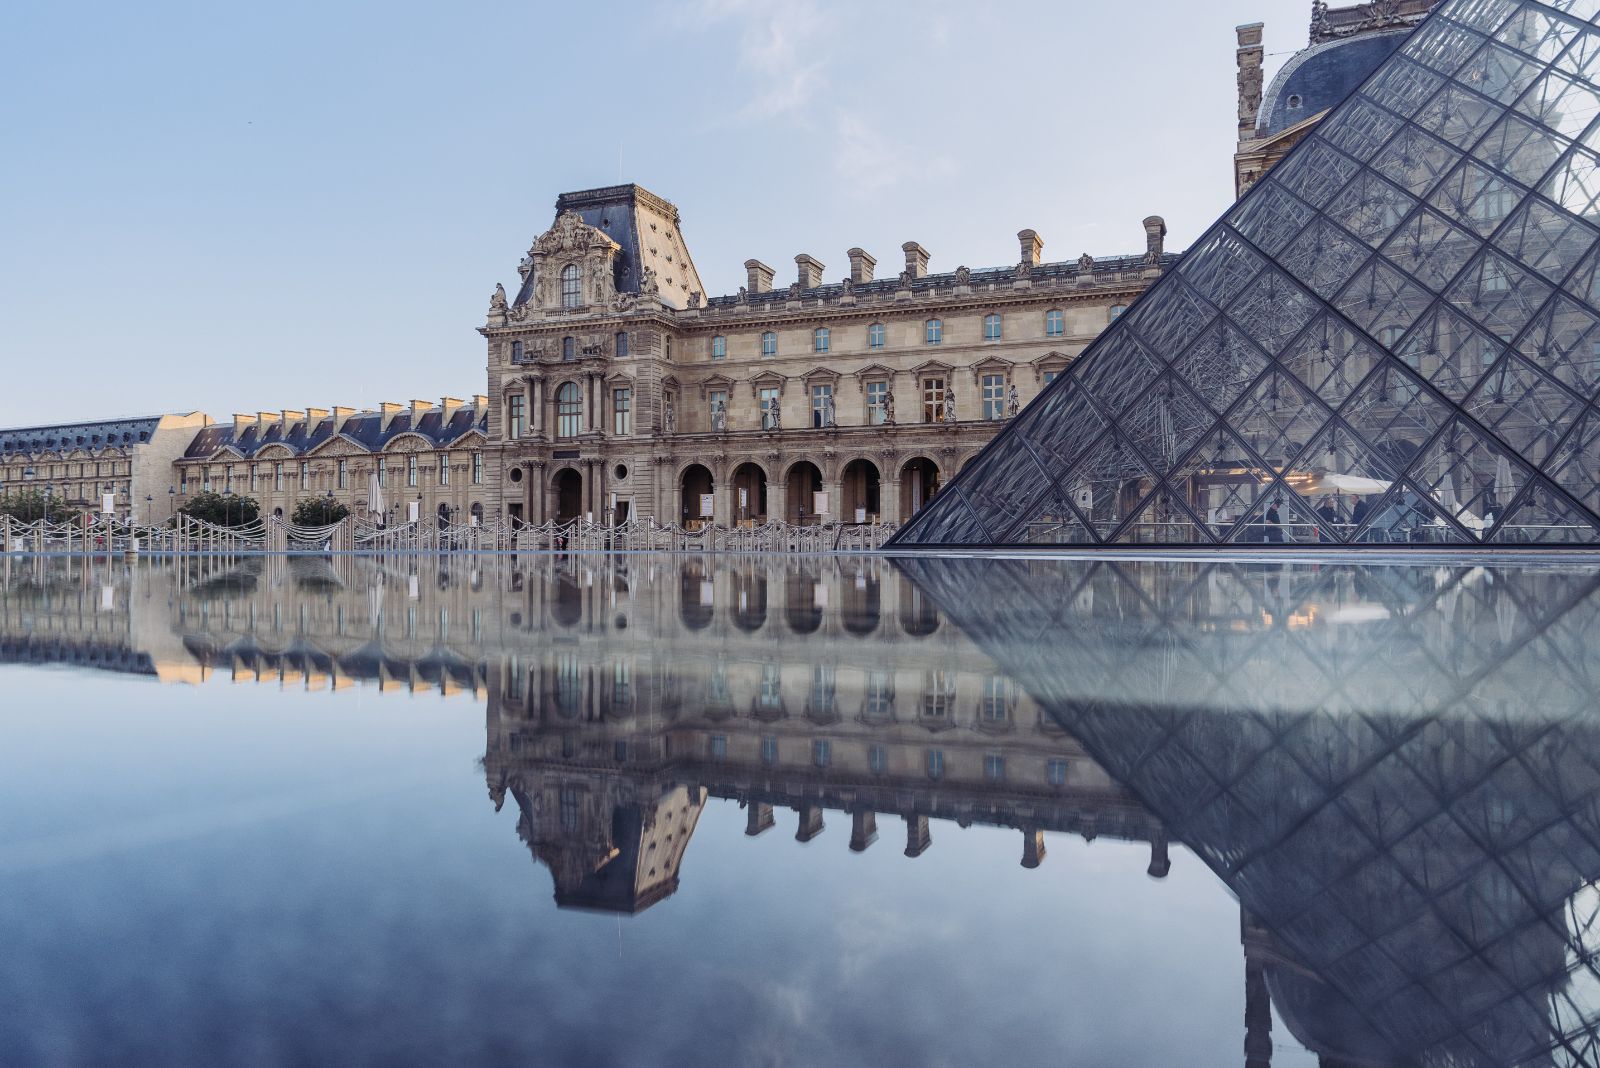 Exterior view of the Louvre in Paris, France